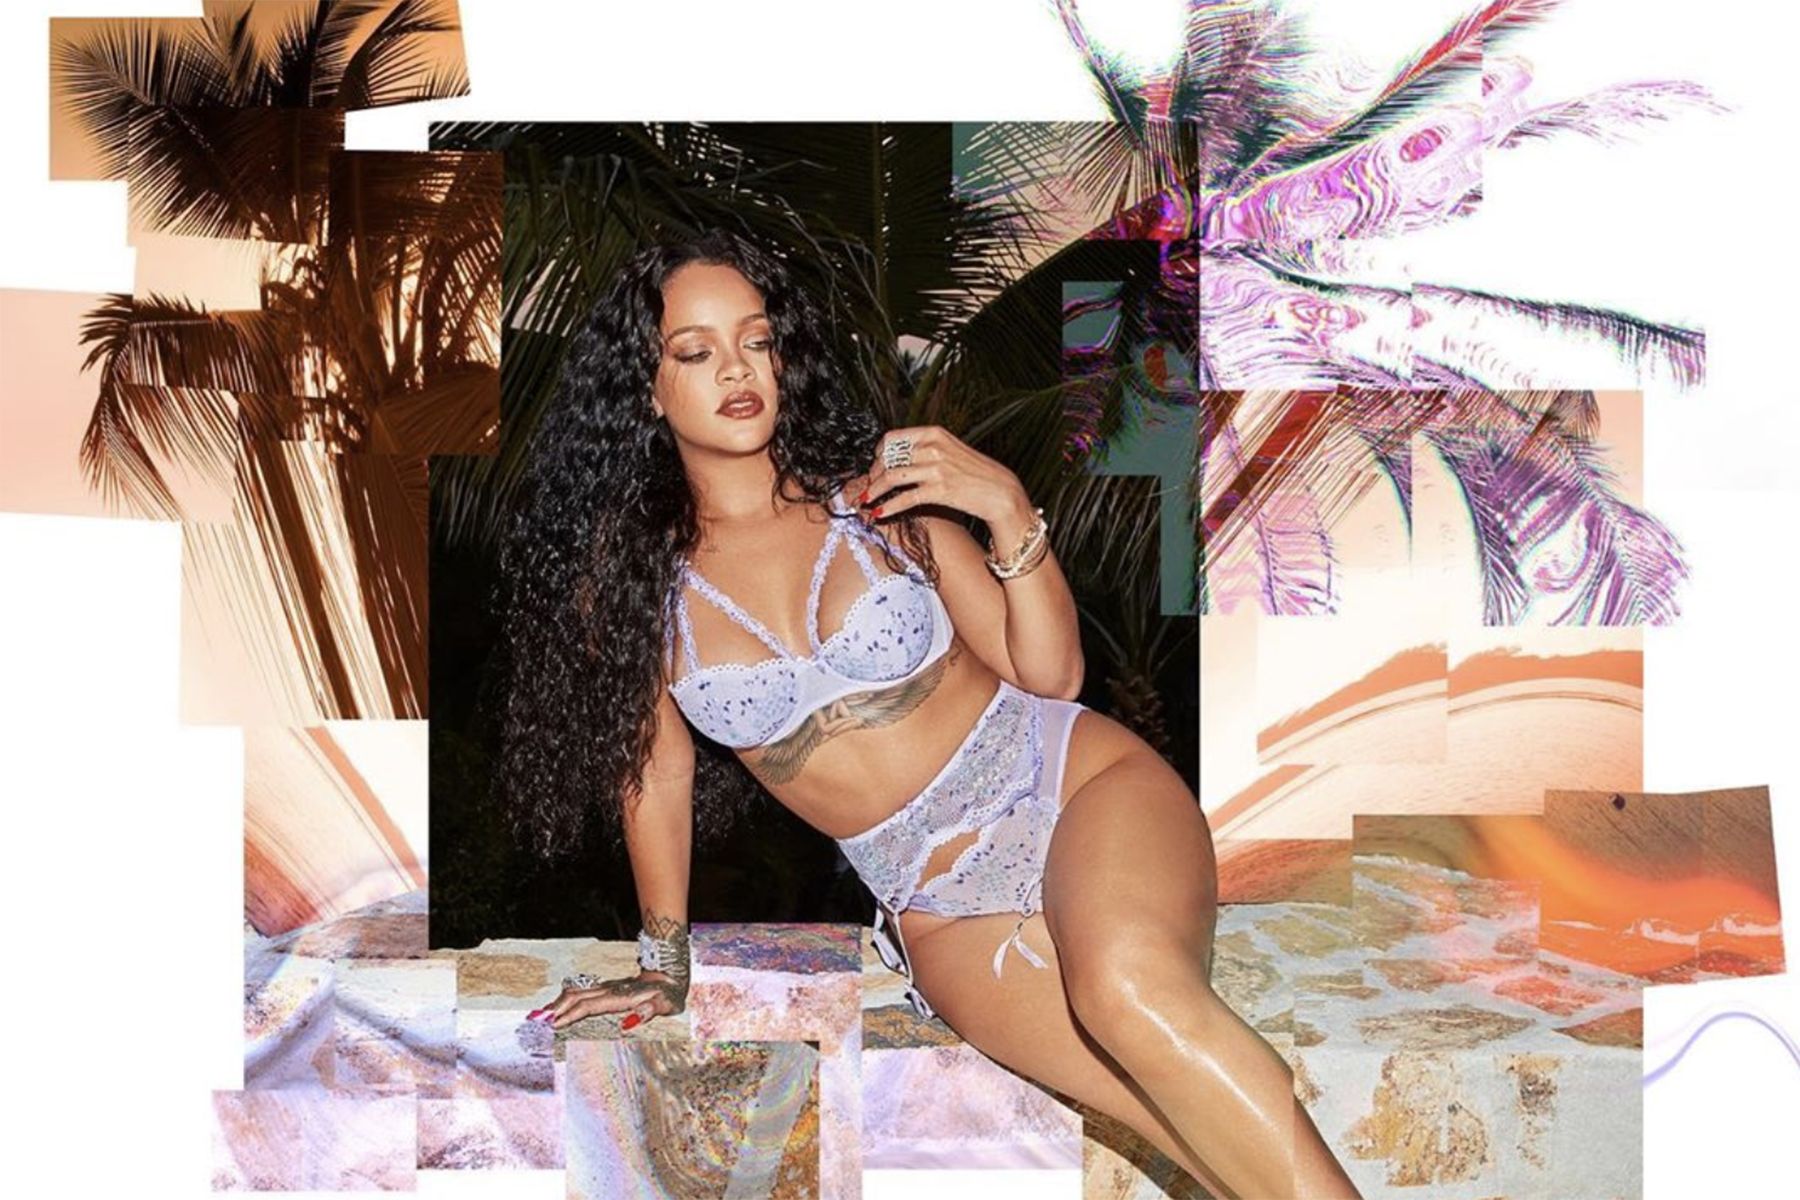 https://firstclasse.com.my/wp-content/uploads/2020/05/Savage-X-Fenty-contest-featured.png